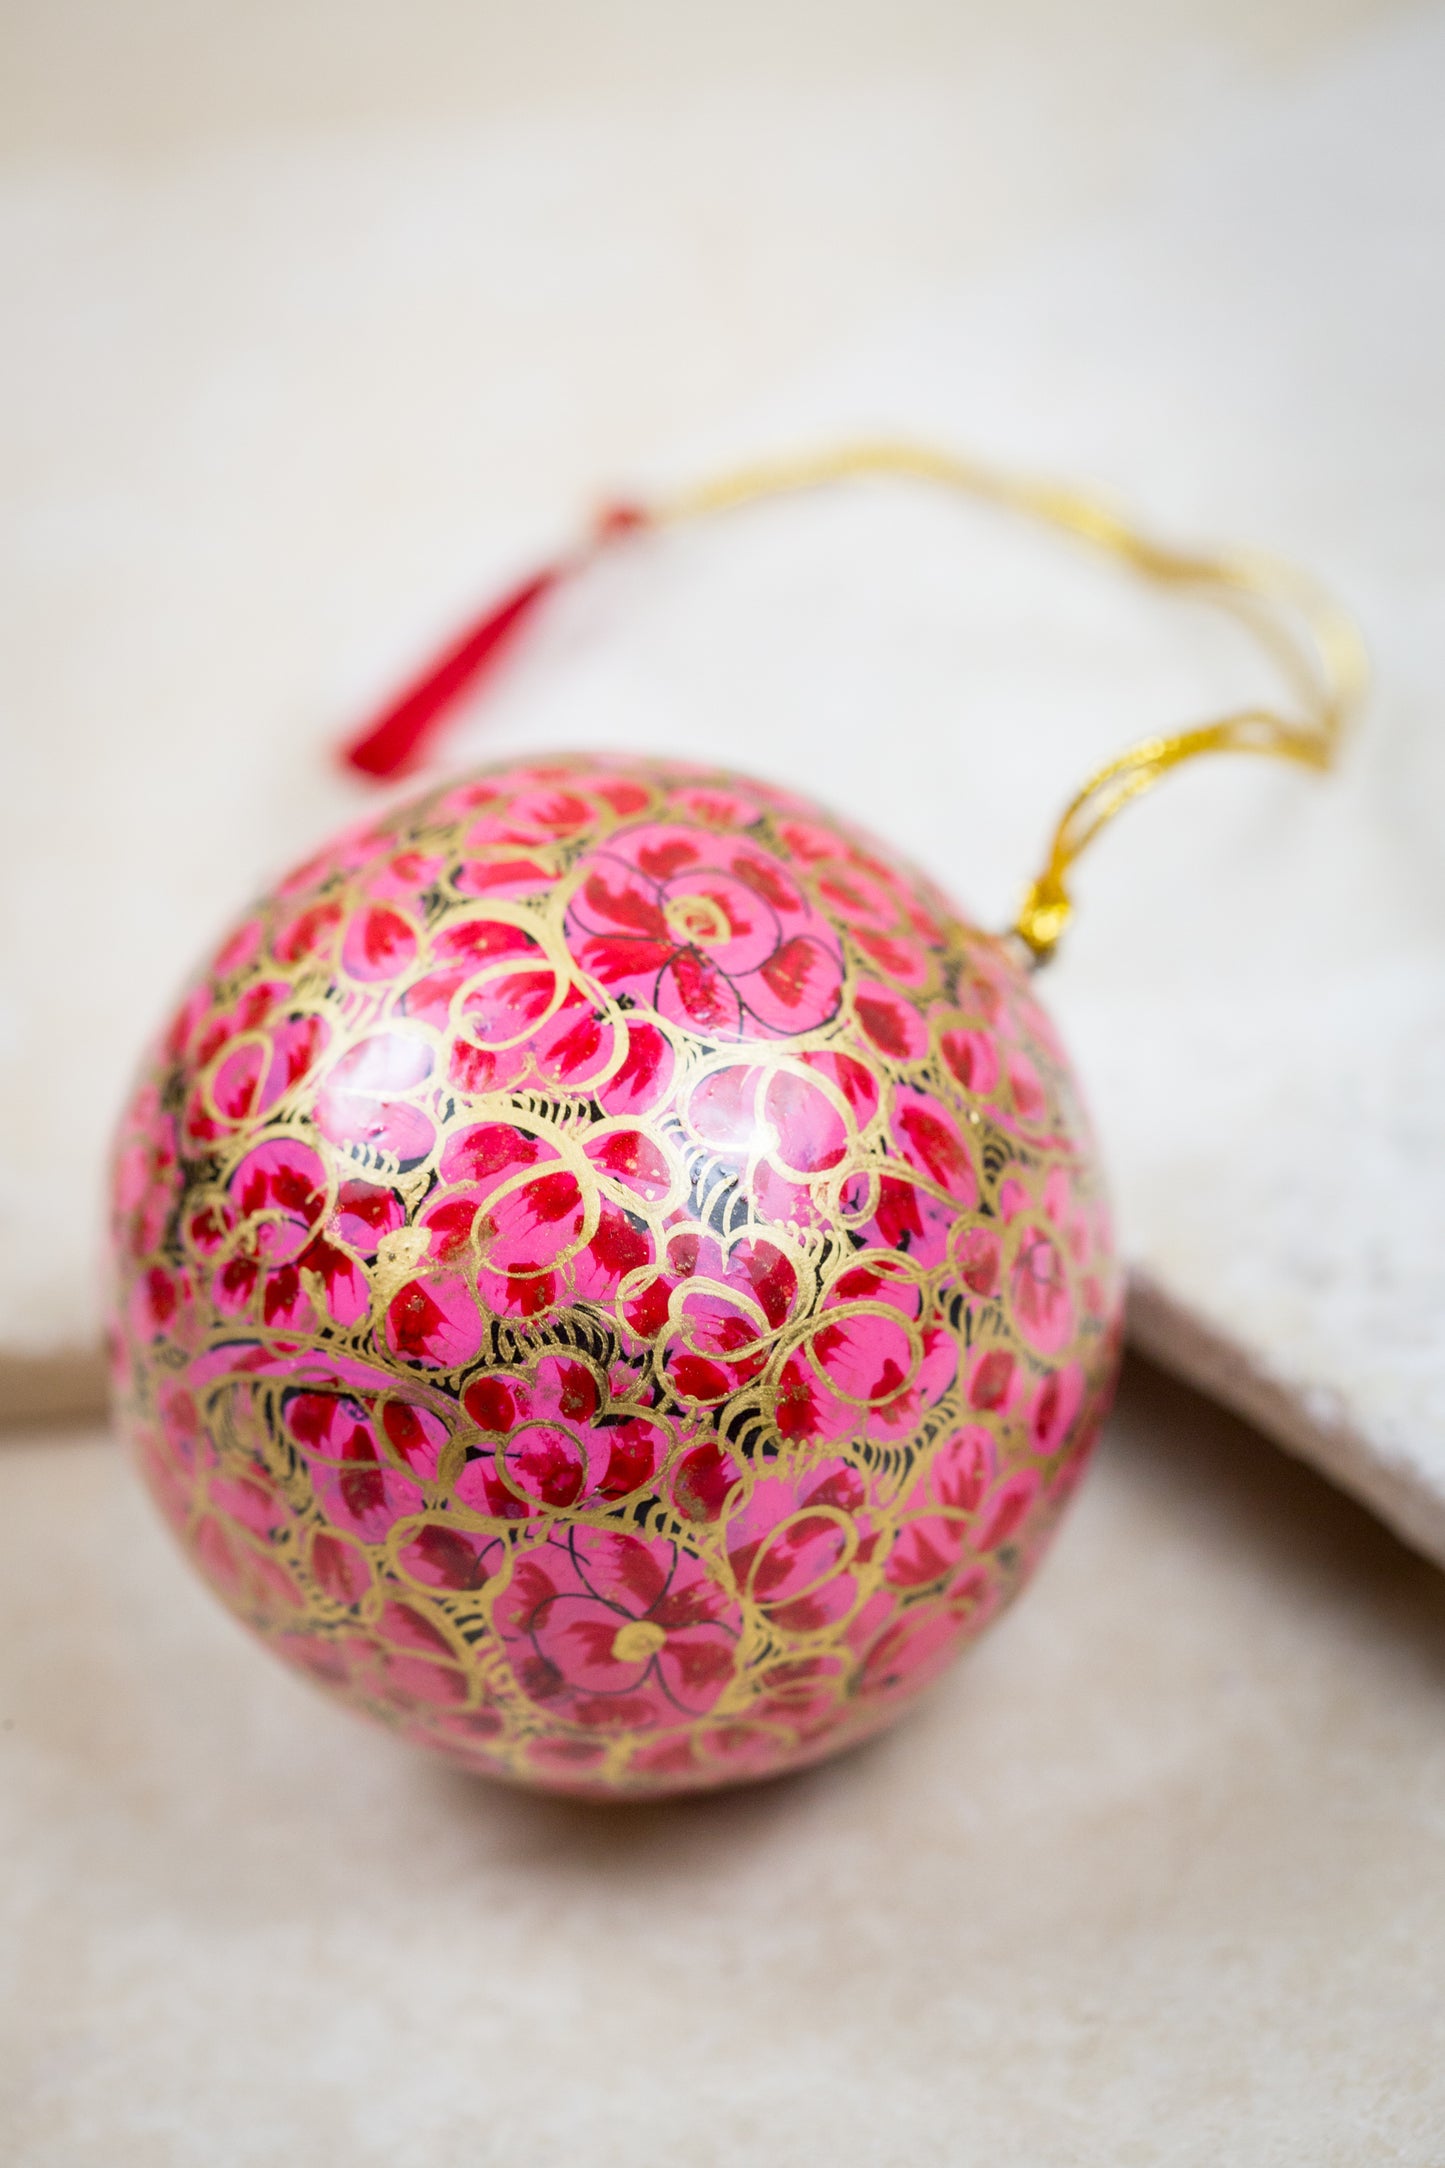 Handmade and hand painted decorative ornament pink